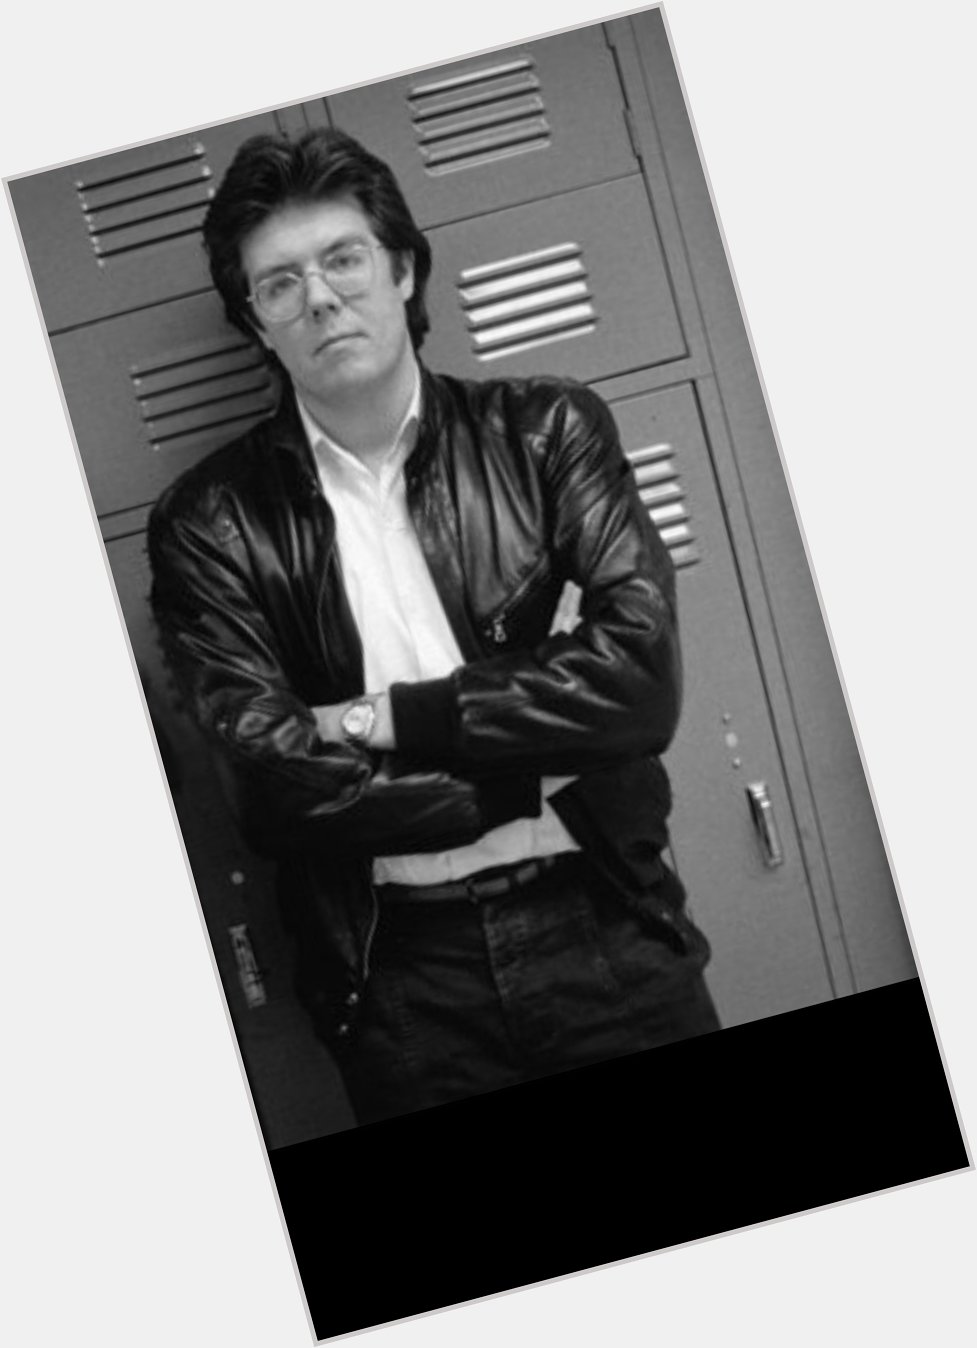 Happy birthday to the great John Hughes and thank you for making the 80s a great time for us kids 